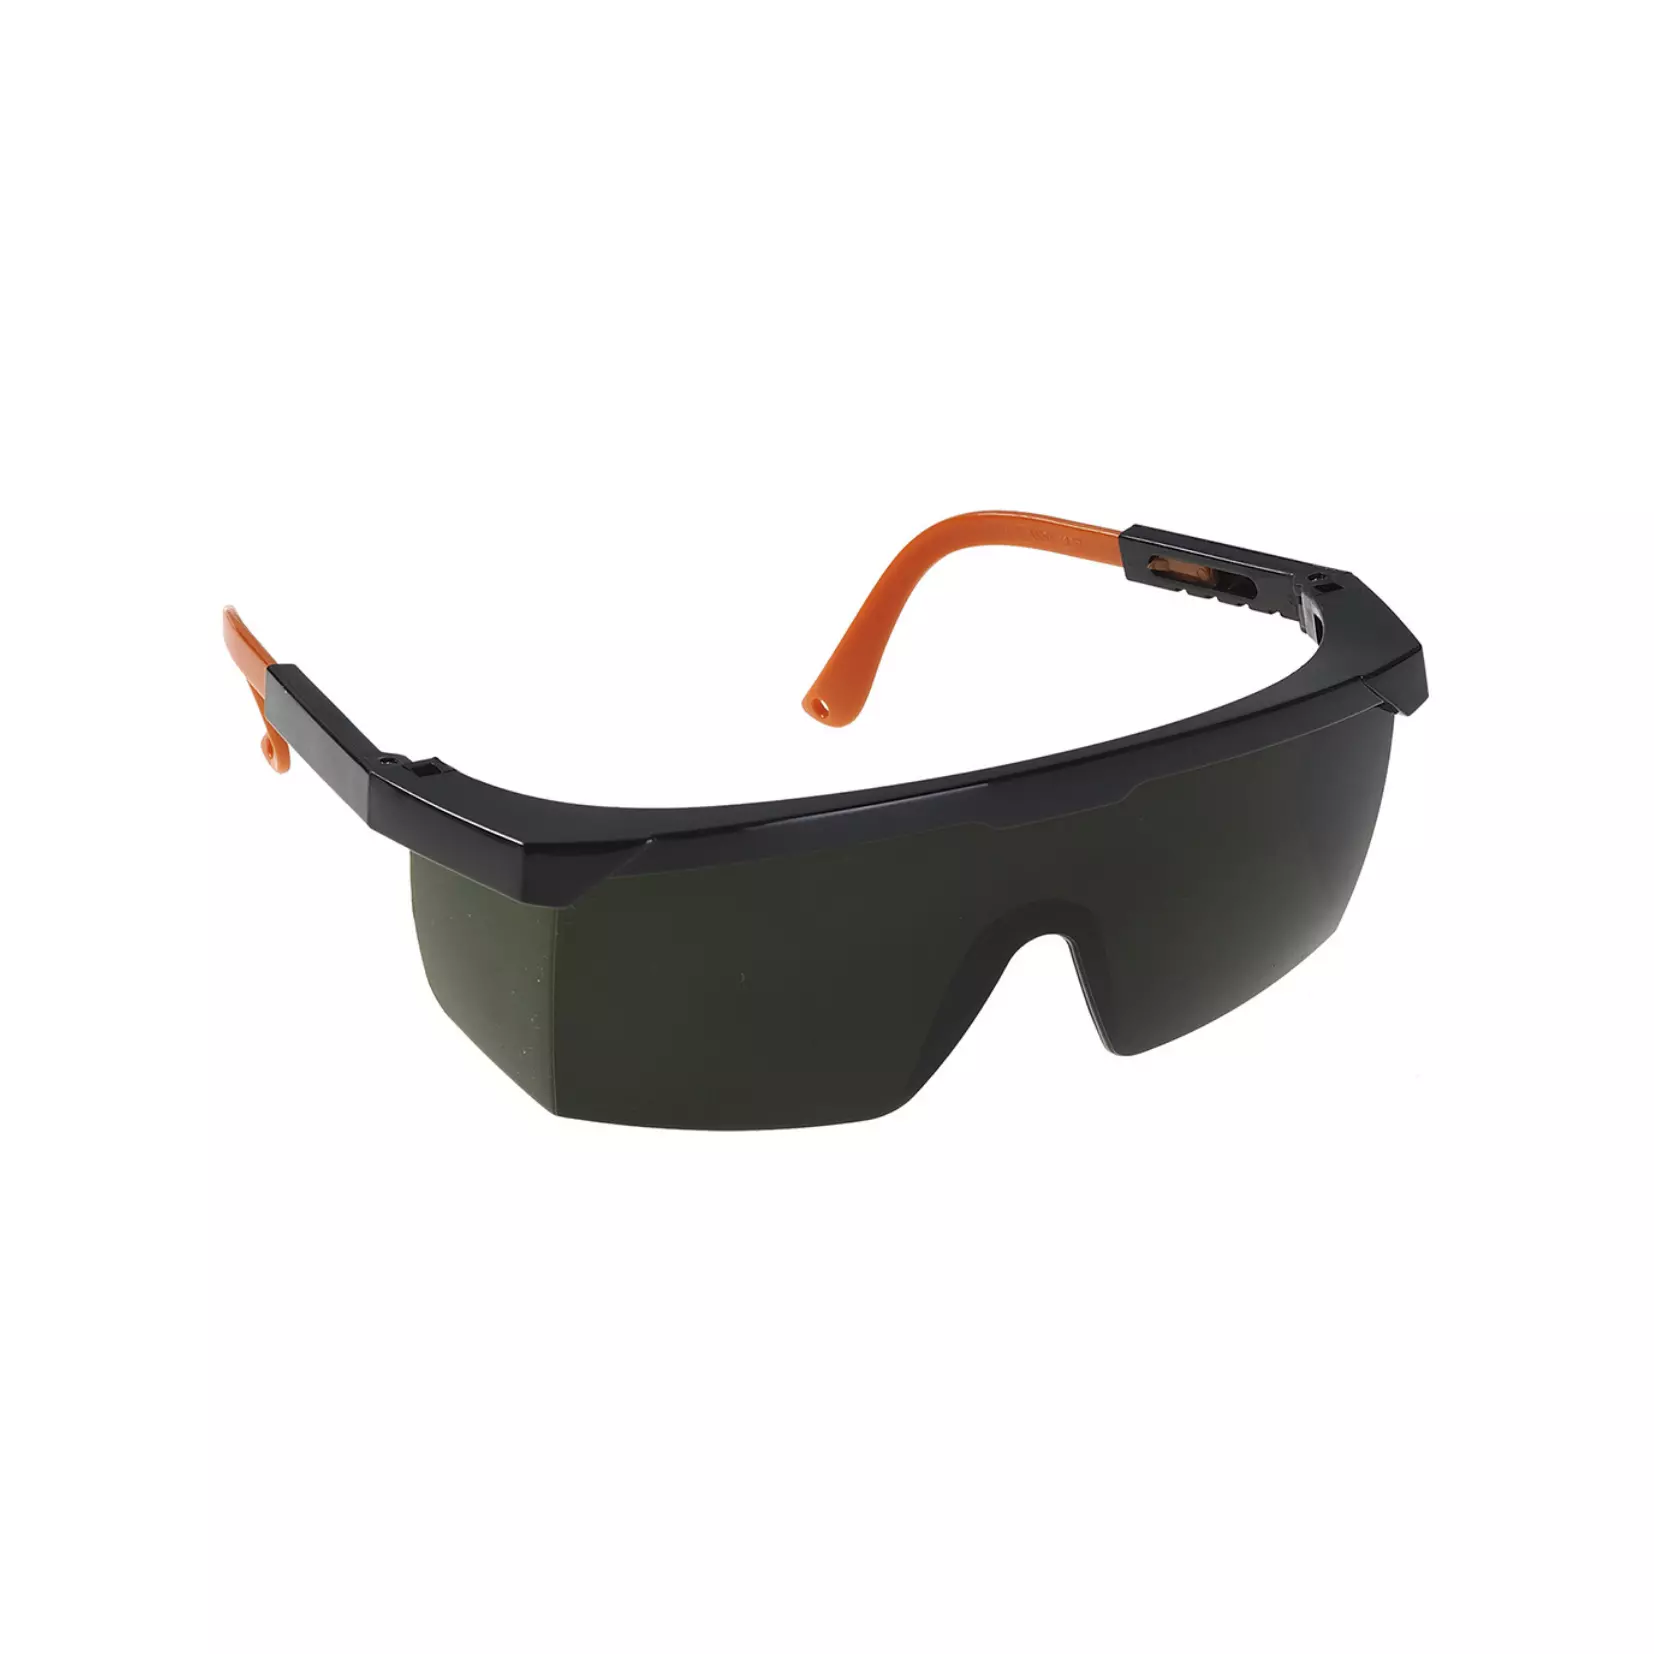 Portwest welding goggles